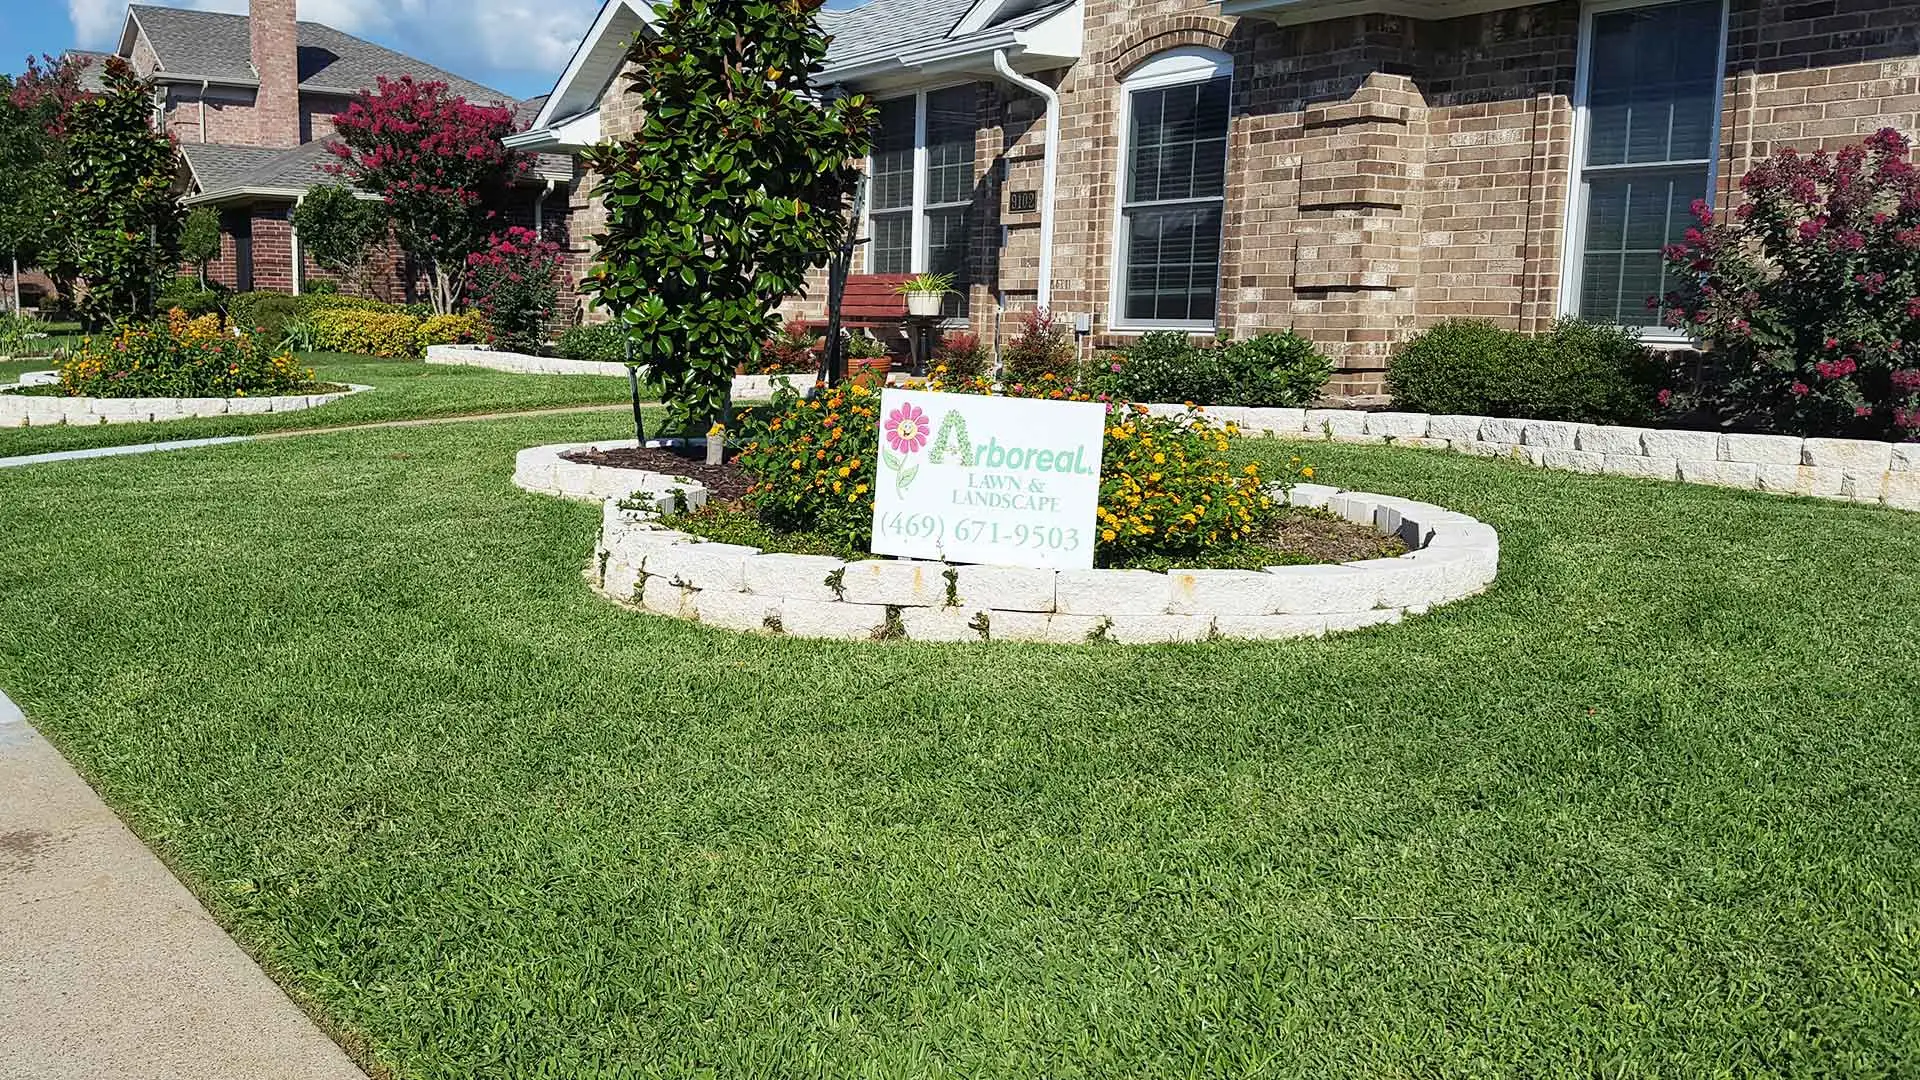 Beautiful lawn with green grass and lawn service sign near Rockwall, TX.